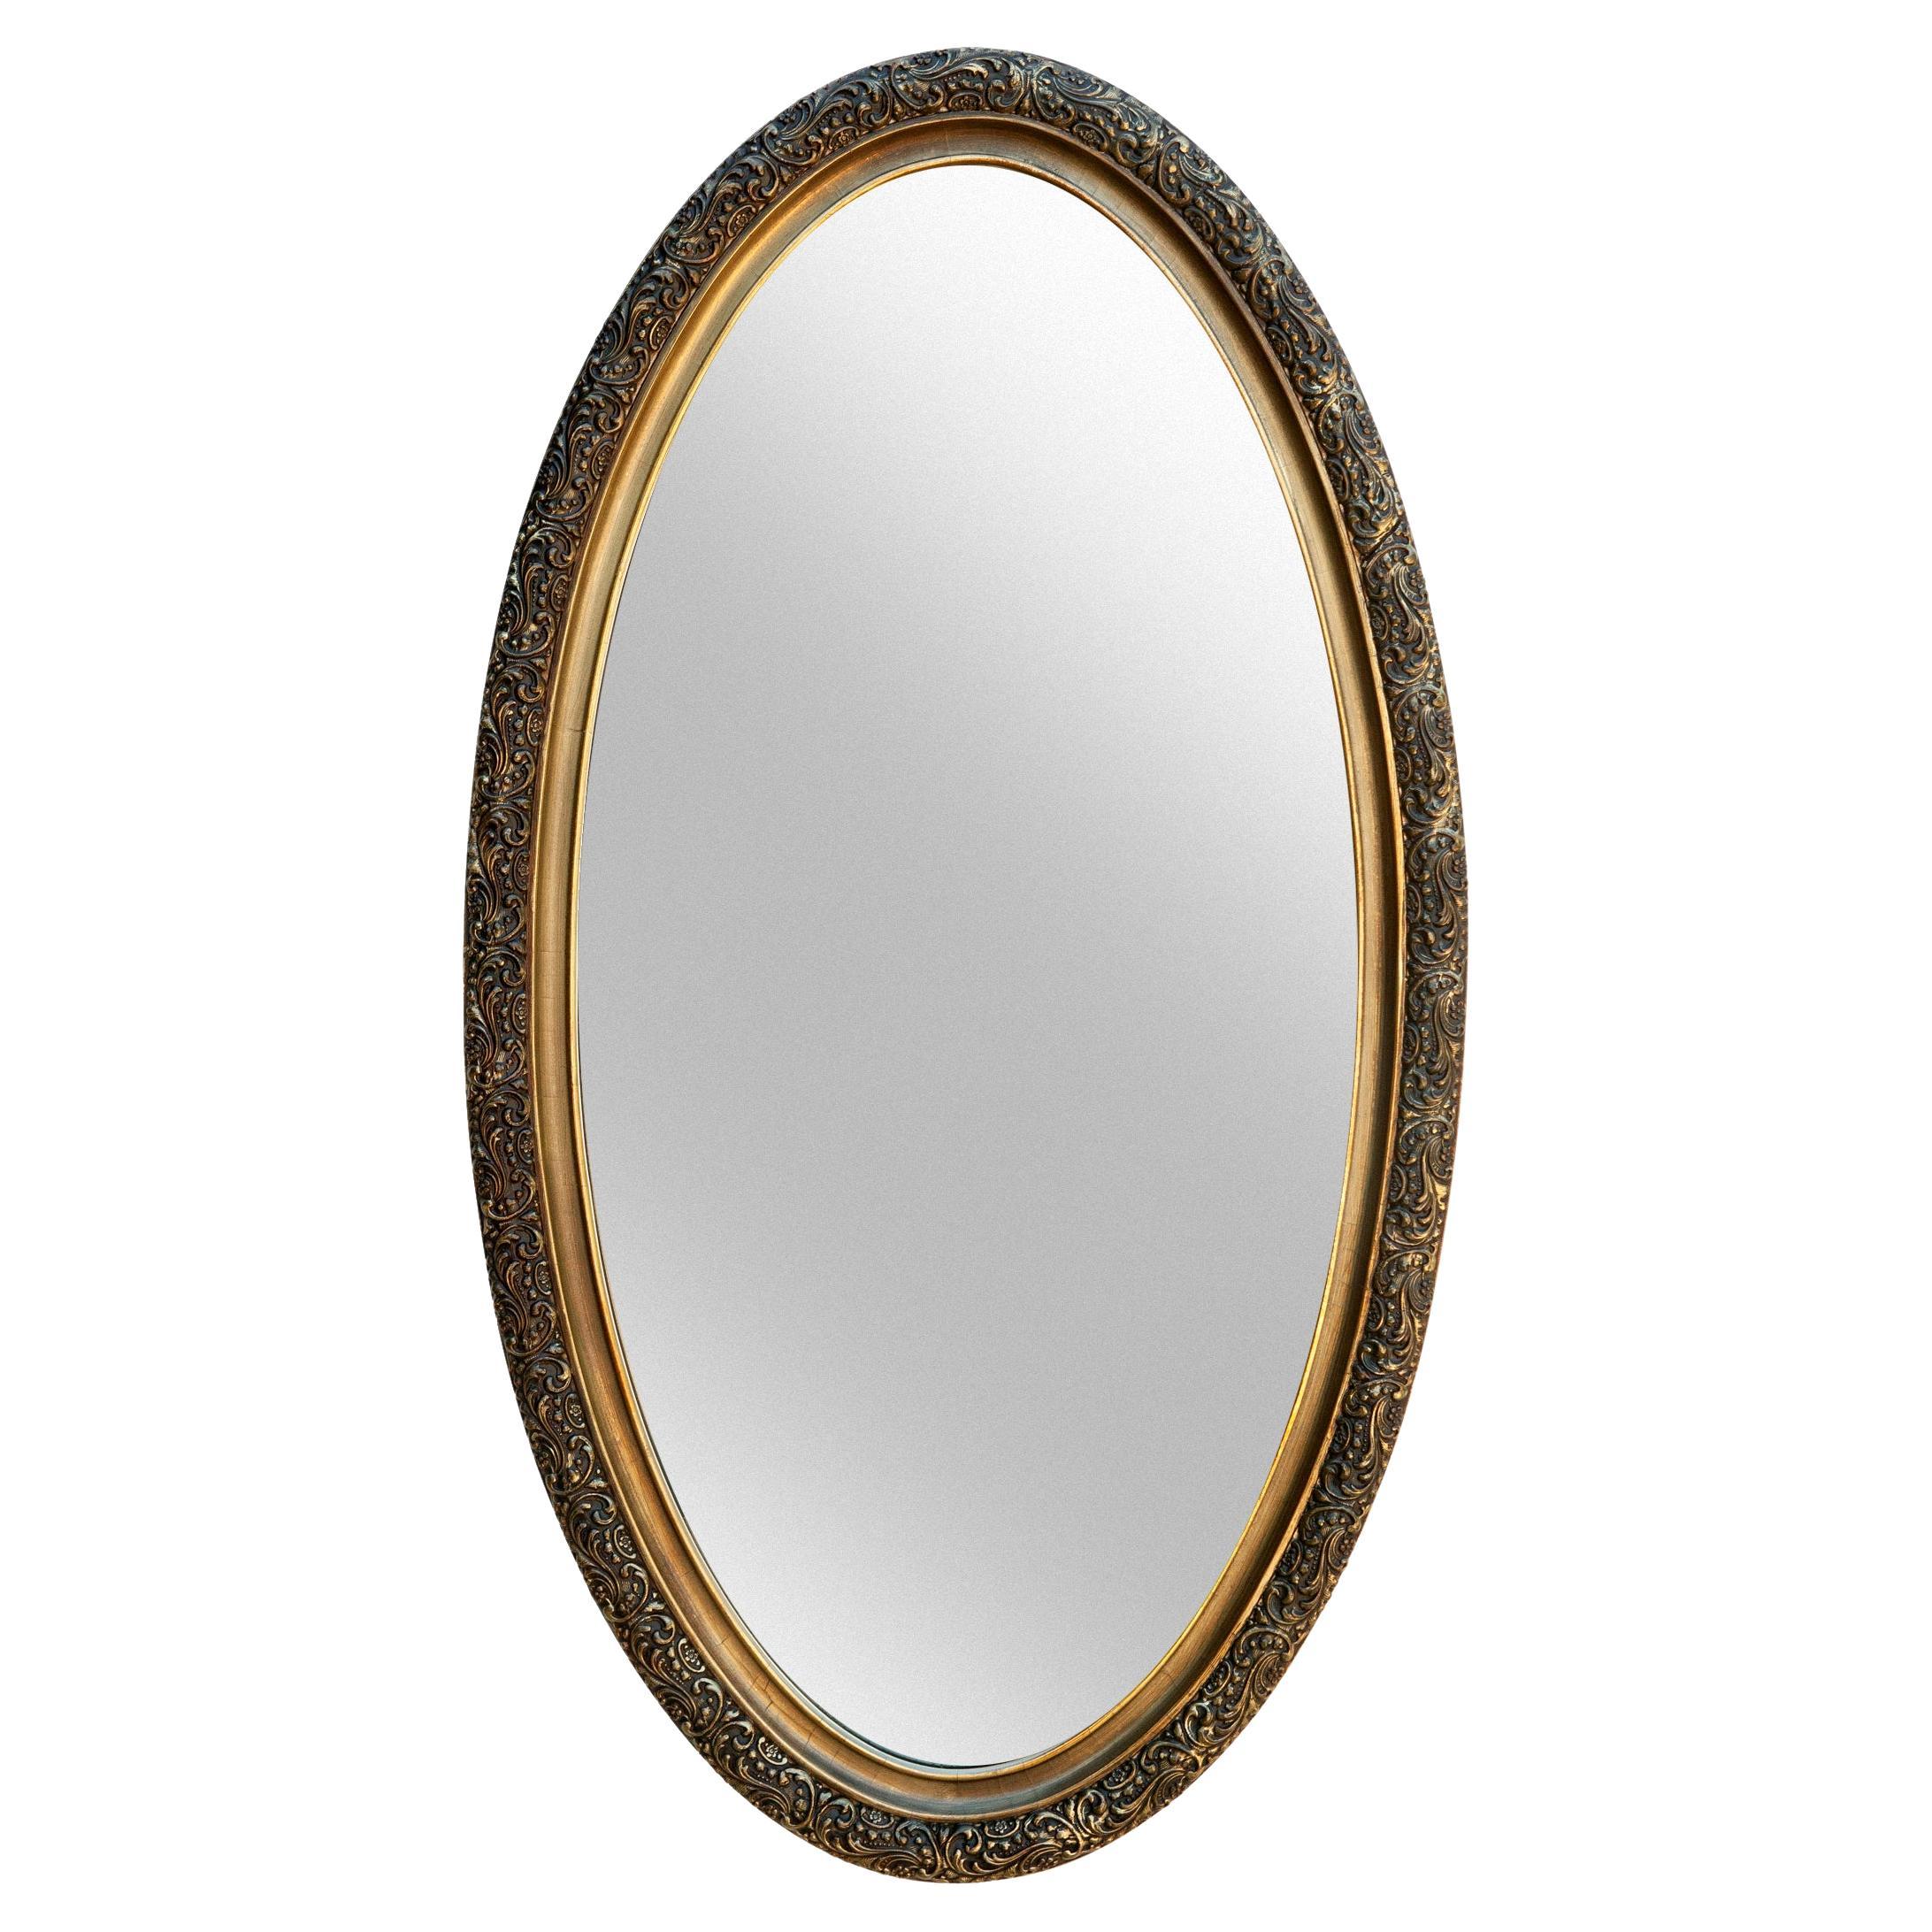 Hand painted Elongated Oval Mirror in Burnt Umber & Gold